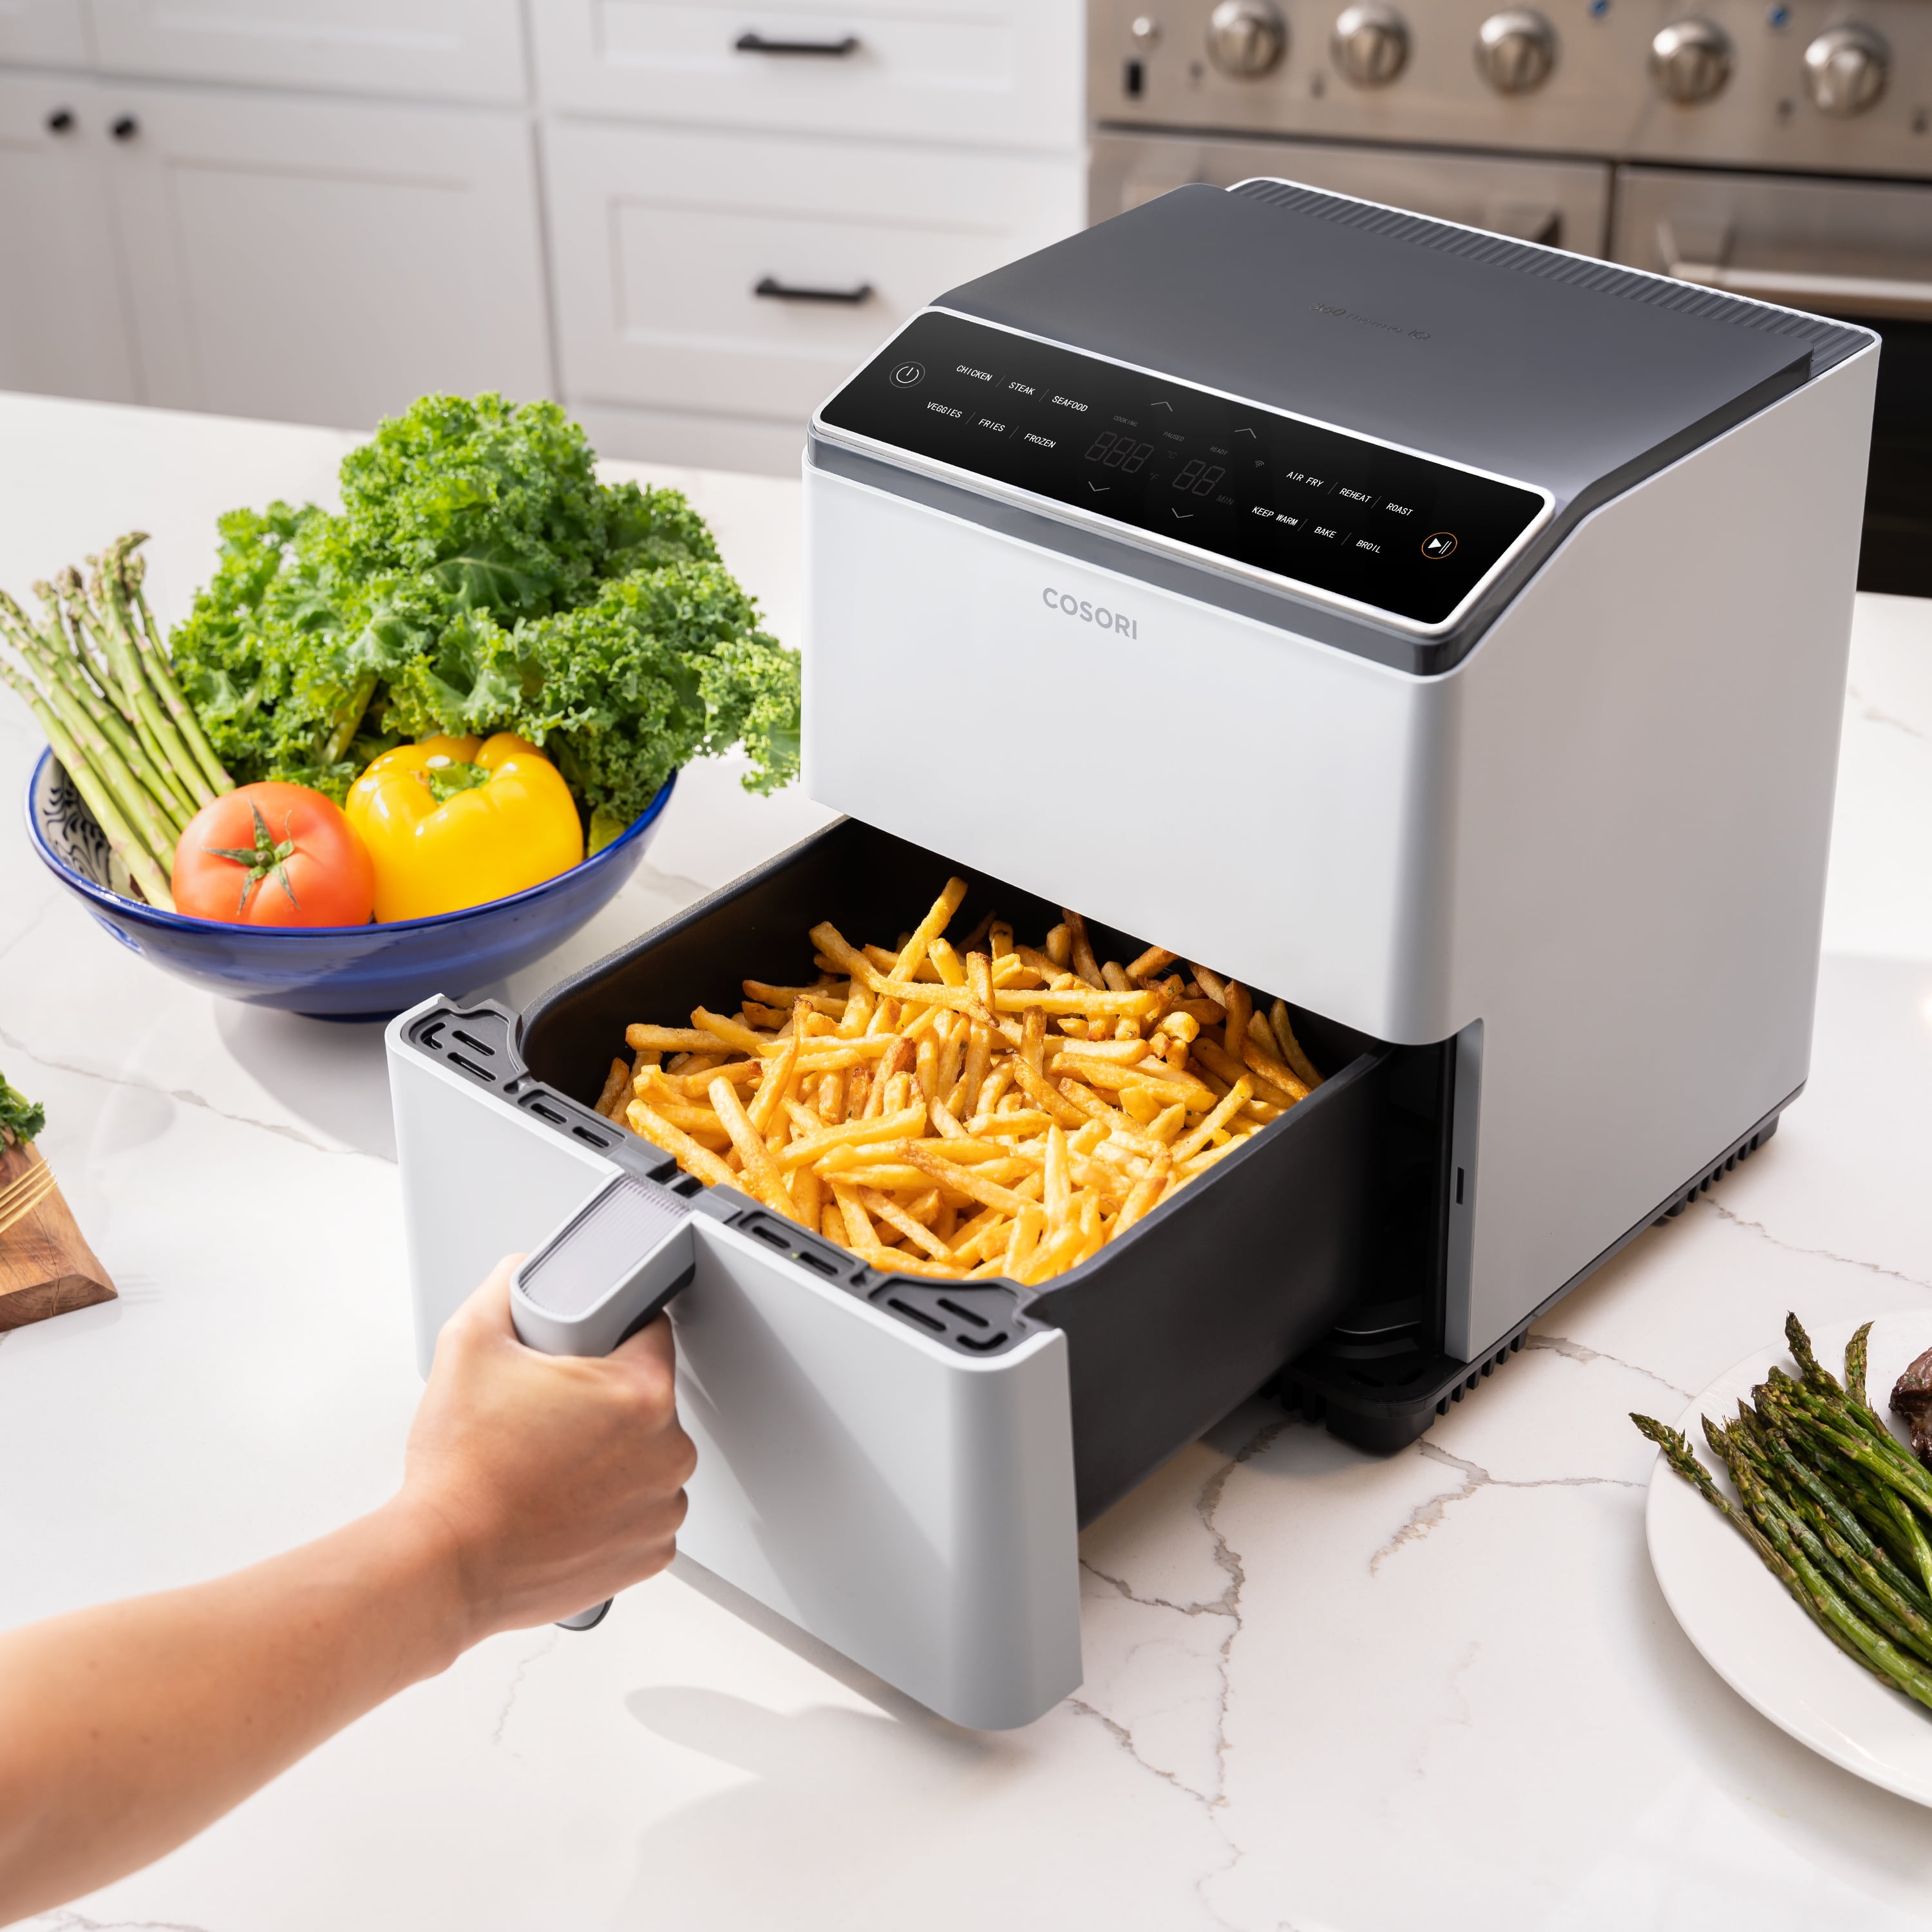  COSORI Pro III Air Fryer Dual Blaze, 6.8-Quart, Precise Temps  Prevent Overcooking, Heating Adjusts for a True Air Fry, Bake, Roast, and  Broil, Even and Fast Cooking, In-App Recipes, 1750W, Dark